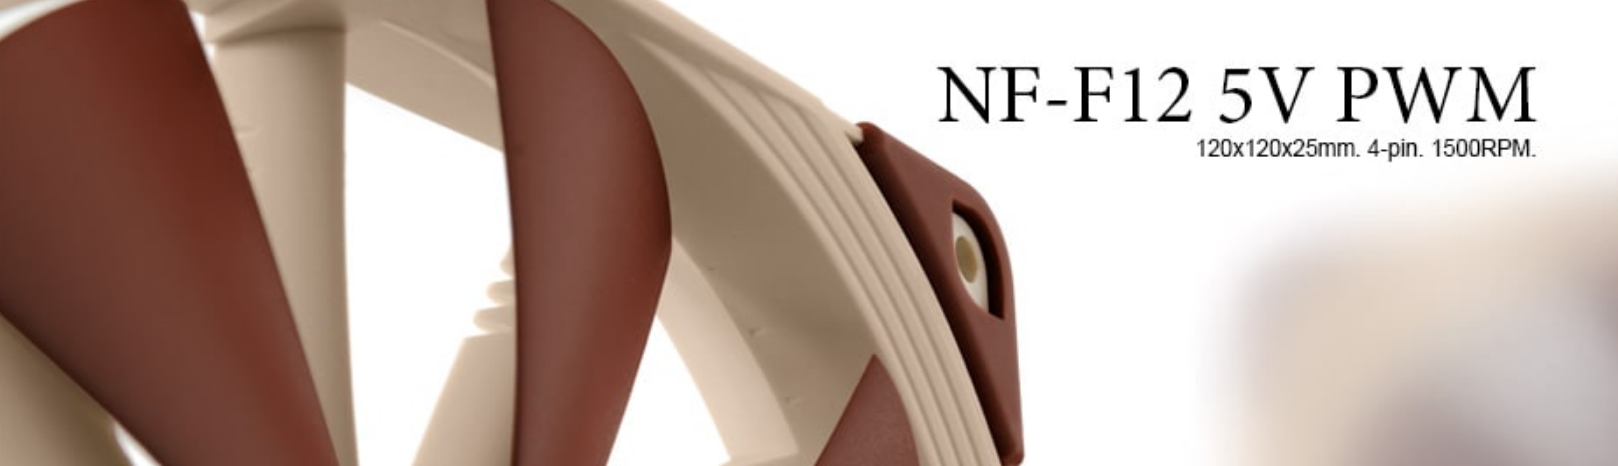 A large marketing image providing additional information about the product Noctua NF-F12 5V PWM 120mm x 25mm 1500RPM Cooling Fan - Additional alt info not provided